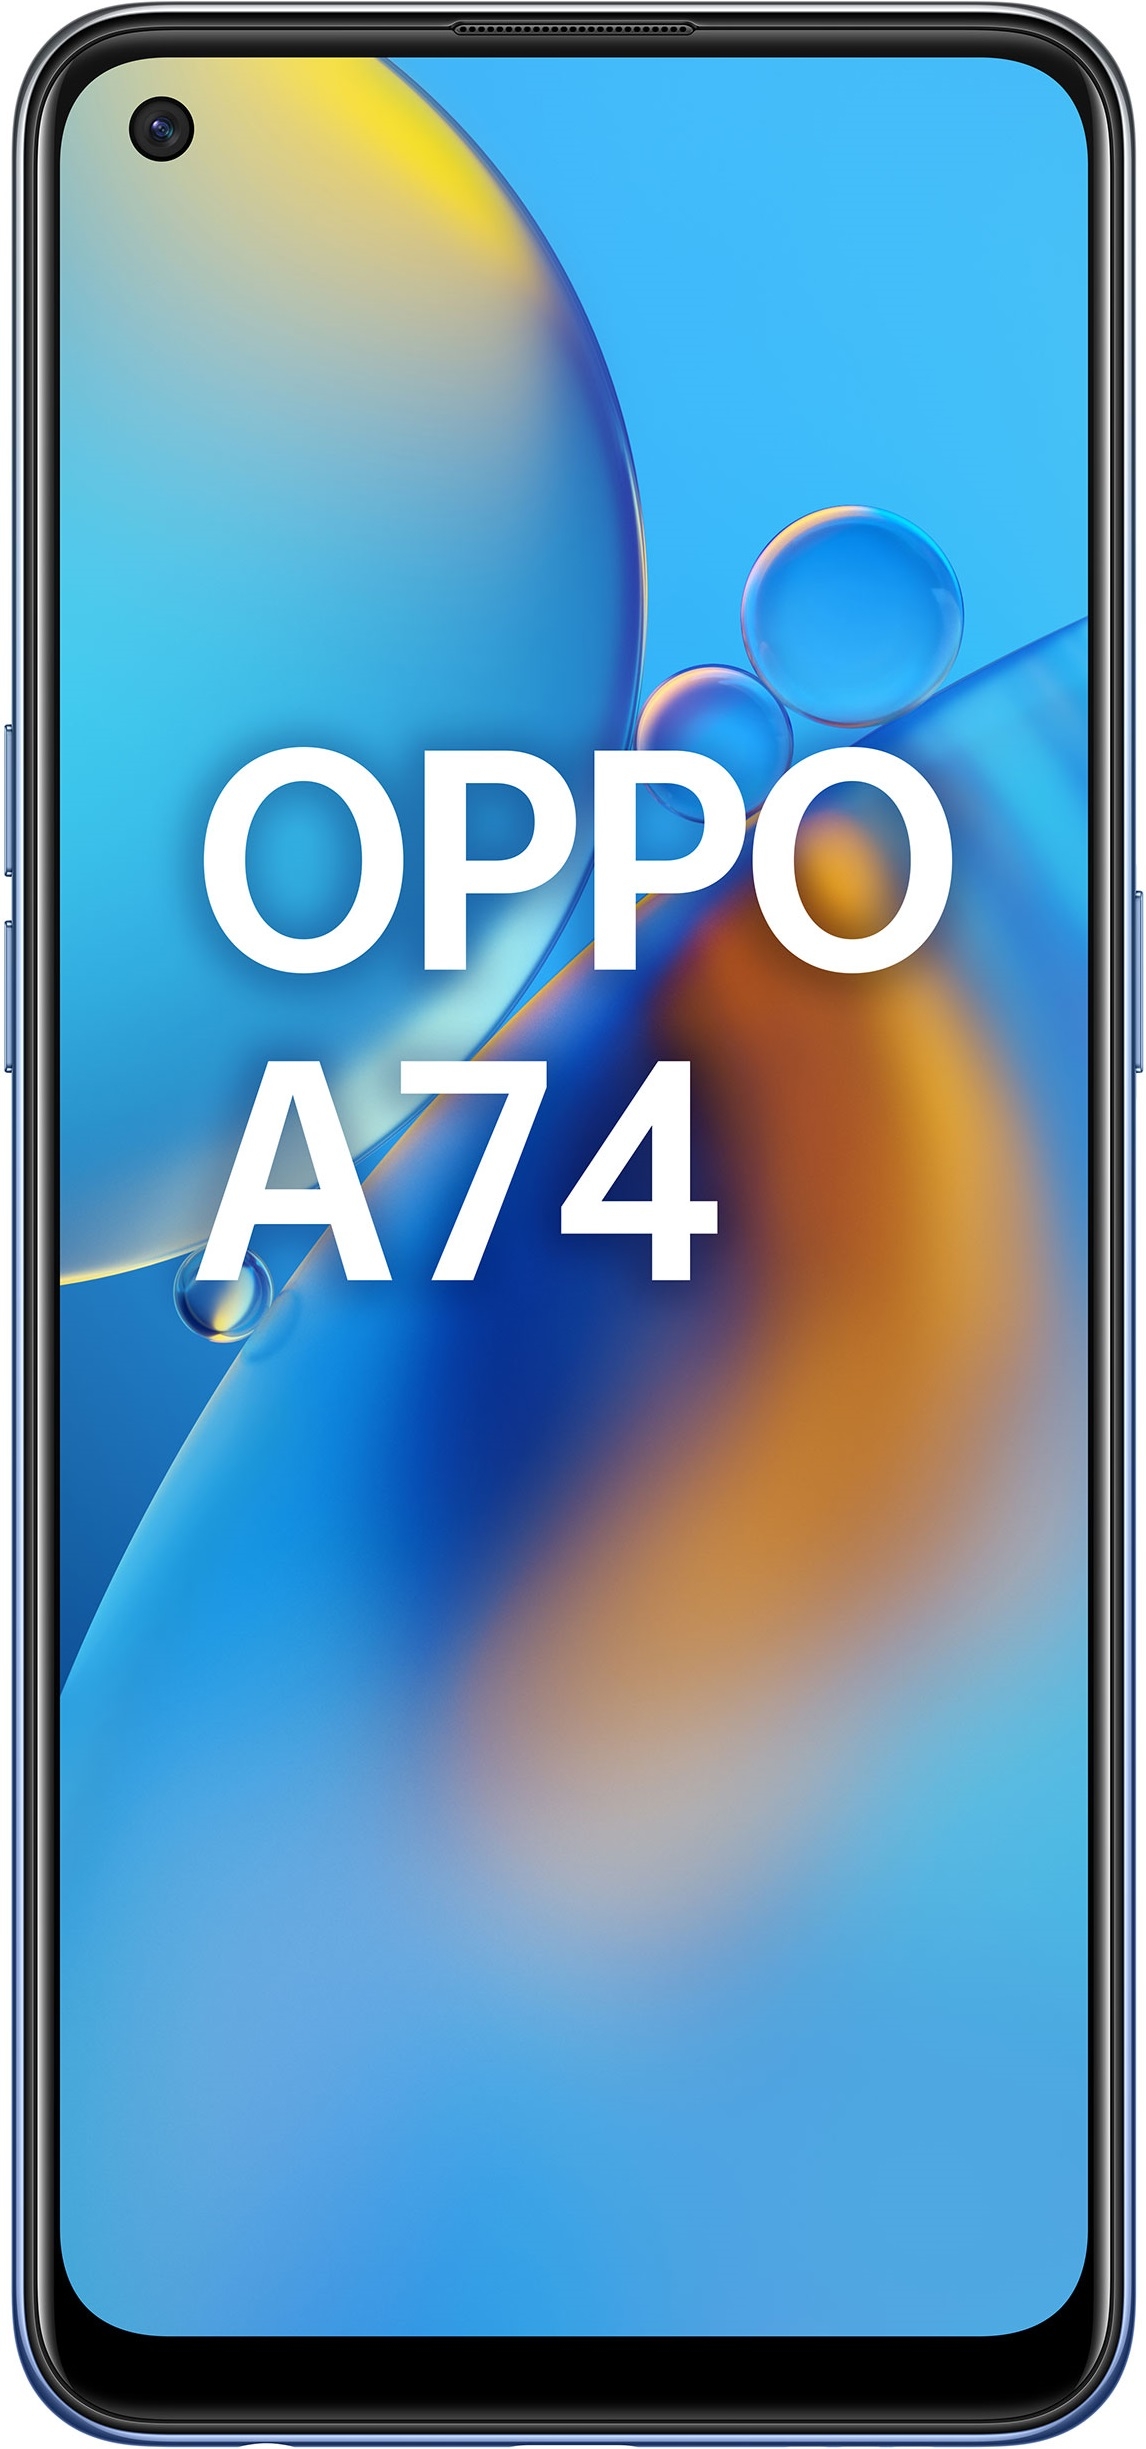 Oppo A74 4/128GB